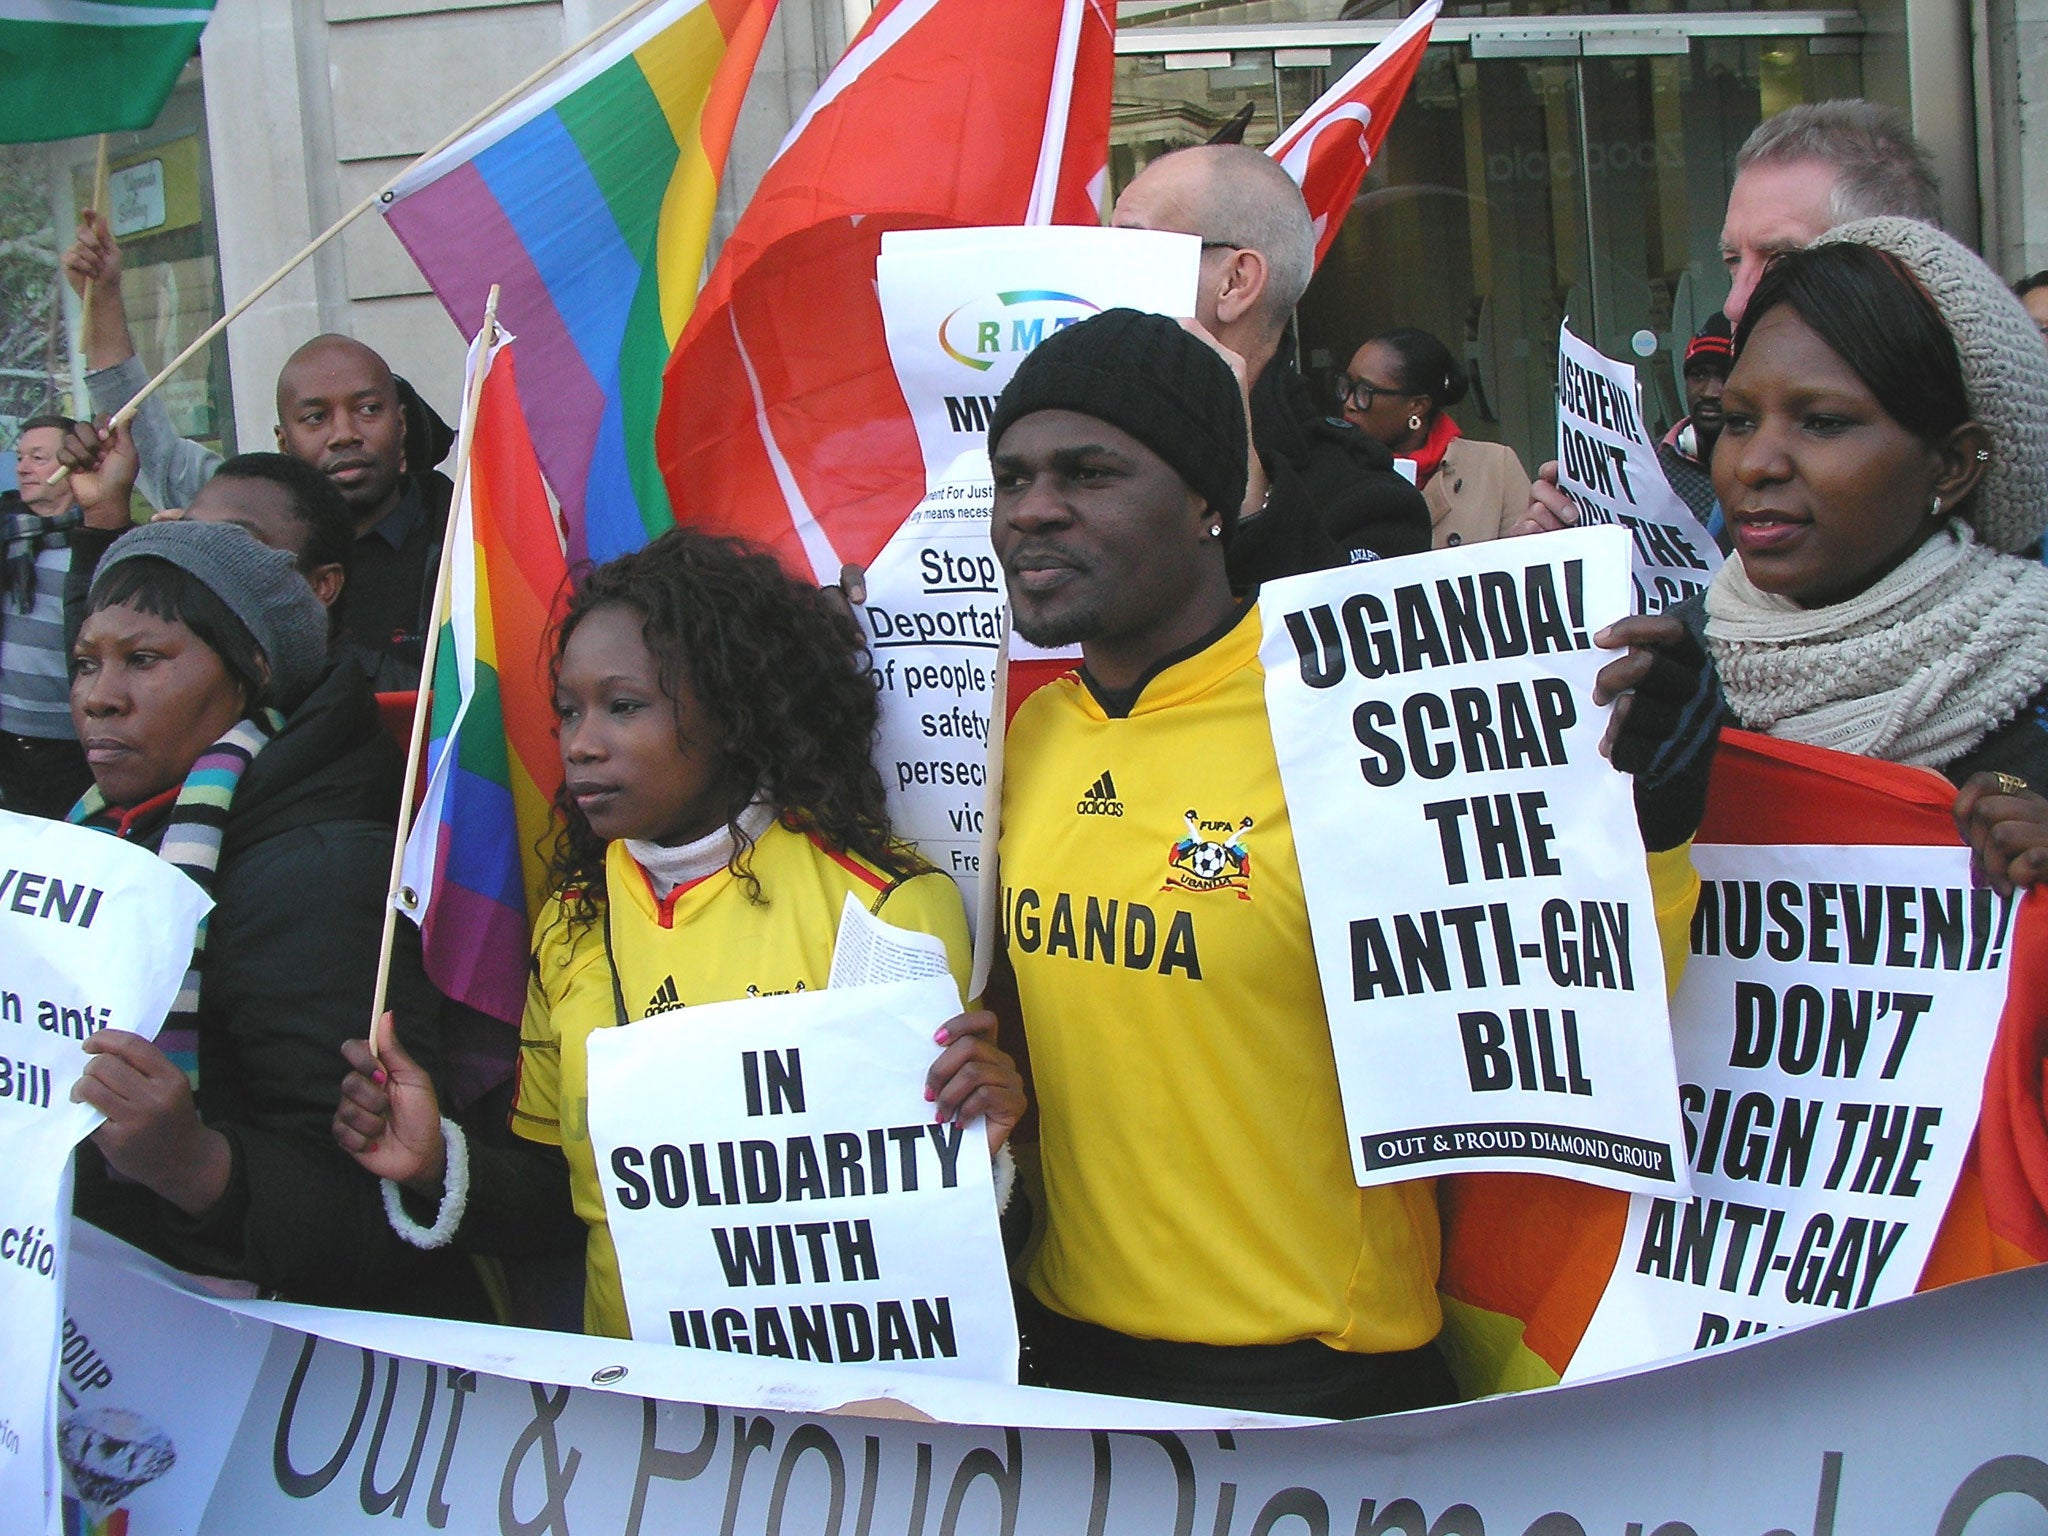 Protesters against Uganda's anti-gay Bill at Uganda High Commission, London on 8 January 2014. MP Alan Duncan has faced criticism for saying that anti-gay laws in Africa and elsewhere are difficult to tackle because they are "primitive cultures."